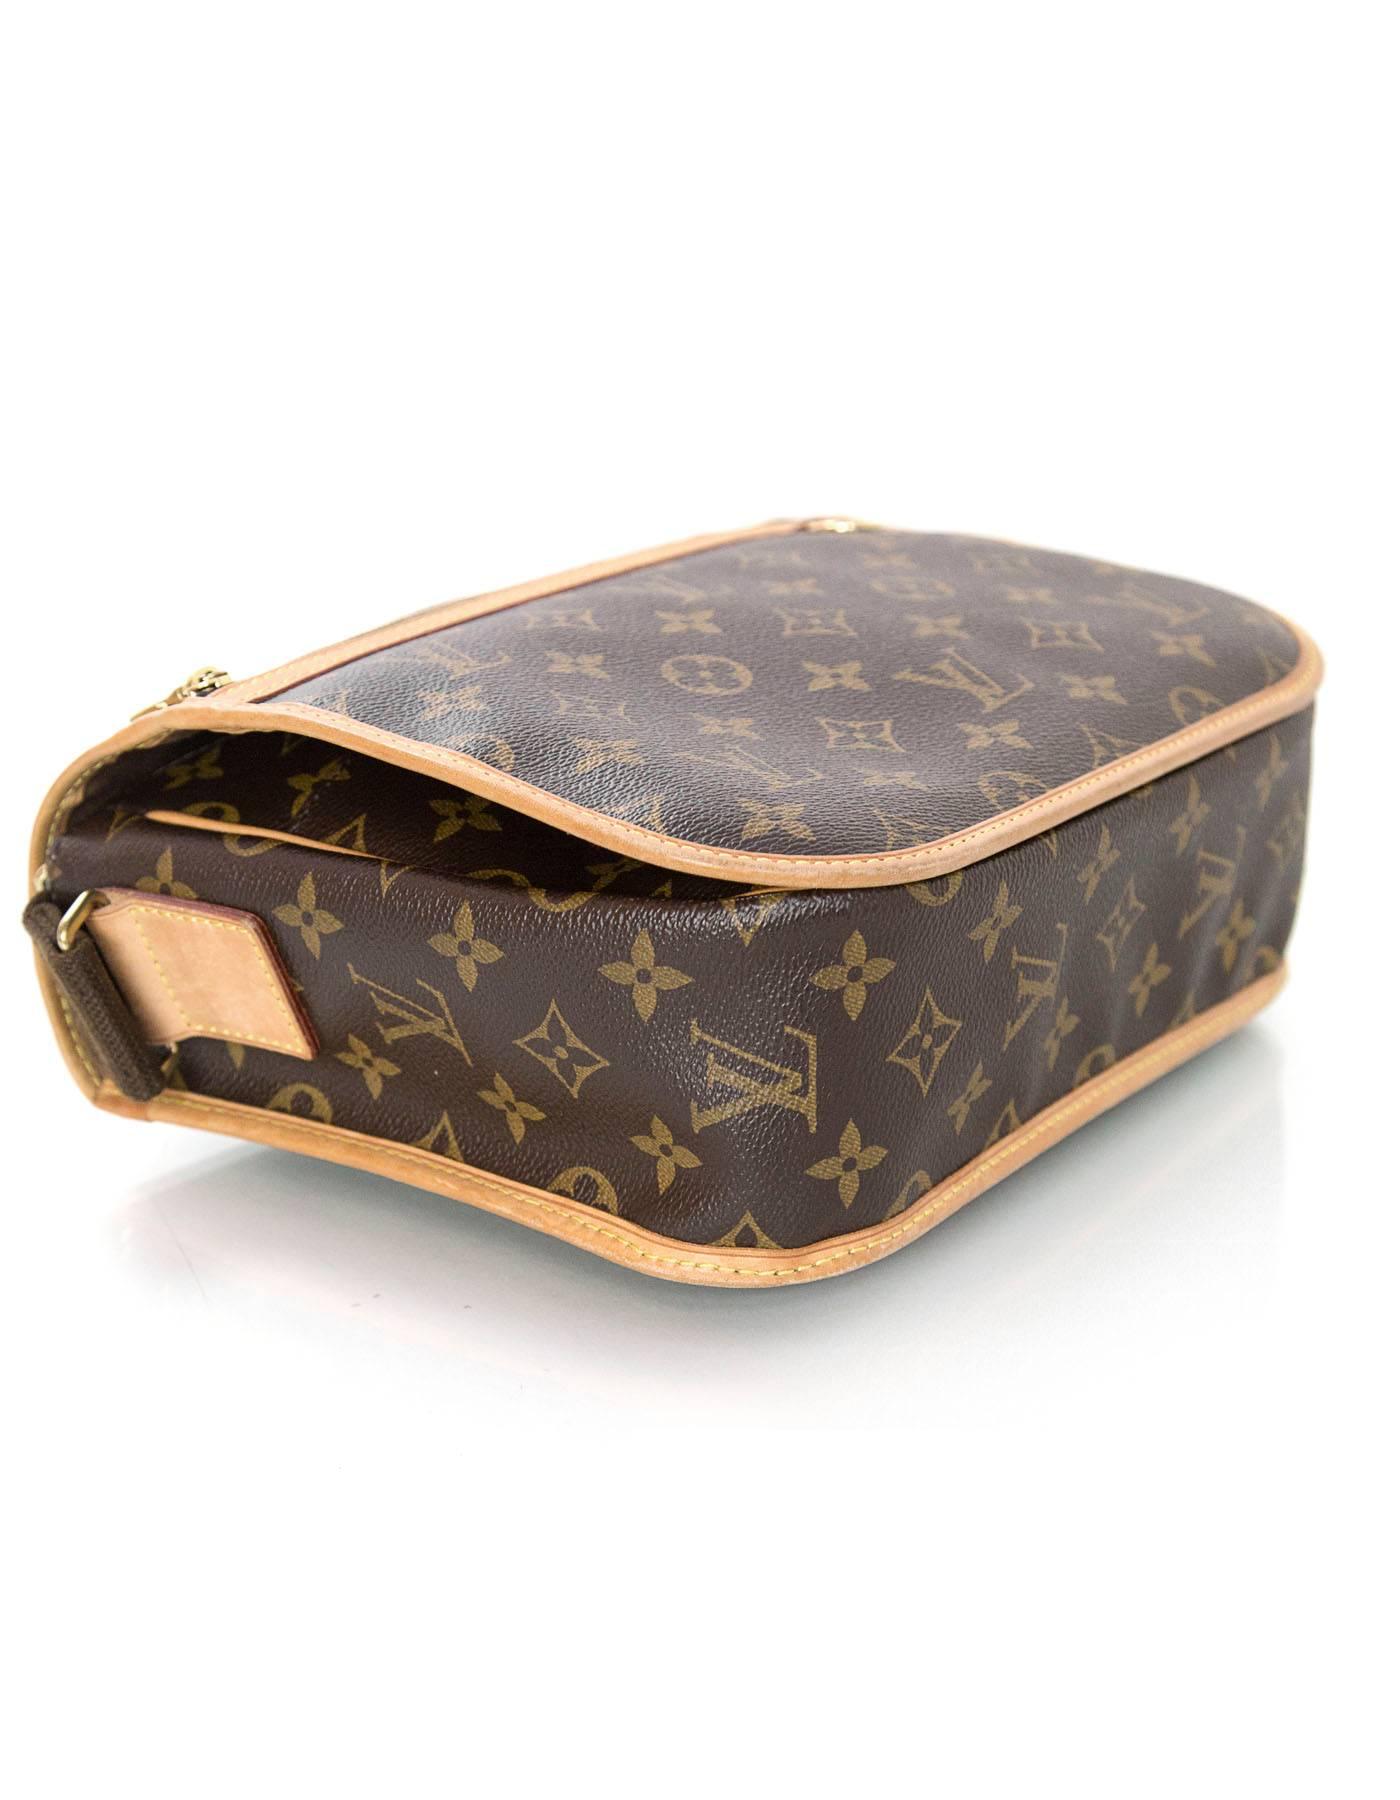 Louis Vuitton Monogram Bosphore PM Messenger Bag In Excellent Condition In New York, NY